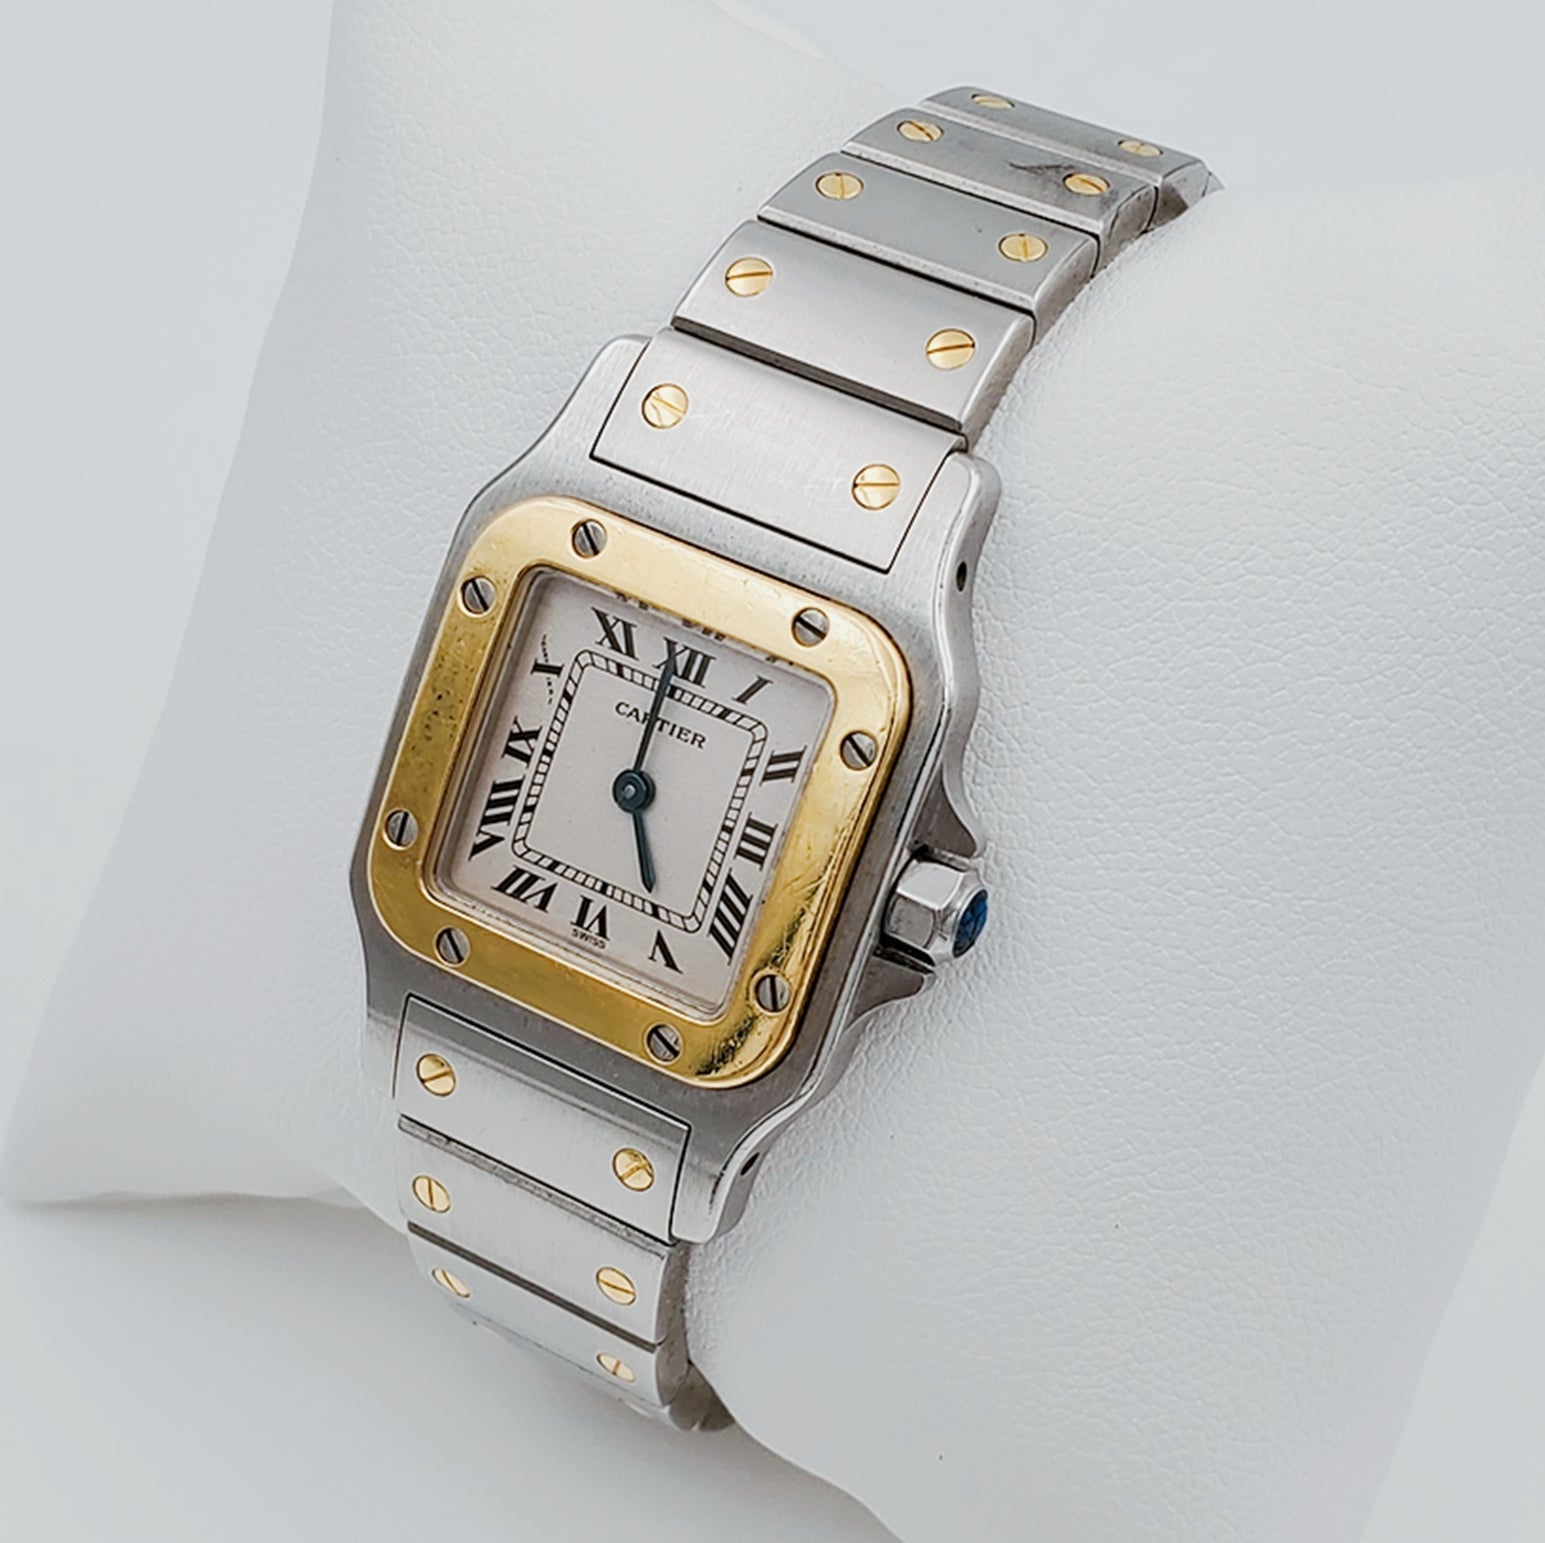 Ladies Cartier 24mm Small Santos 18K Yellow Gold / Stainless Steel Watch with White Dial. (Pre-Owned)